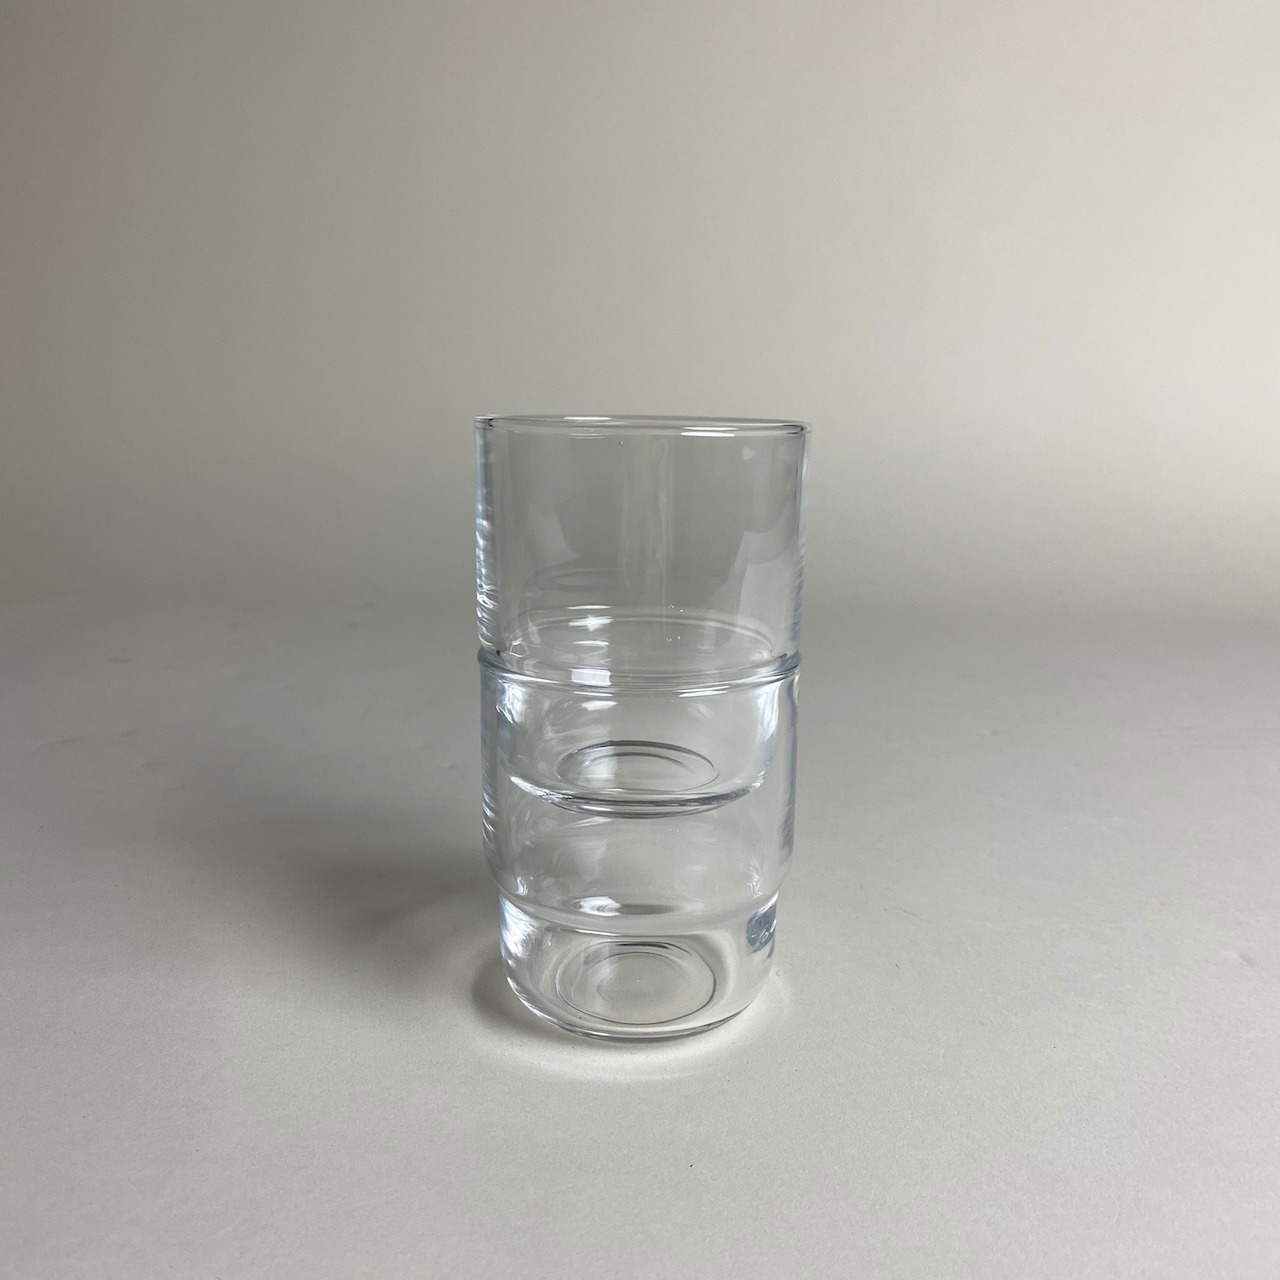 HIMMEL Stacking glass CL  /  ヒメル スタッキング  グラス クリア〈 コップ / 食器 / ガラス 〉